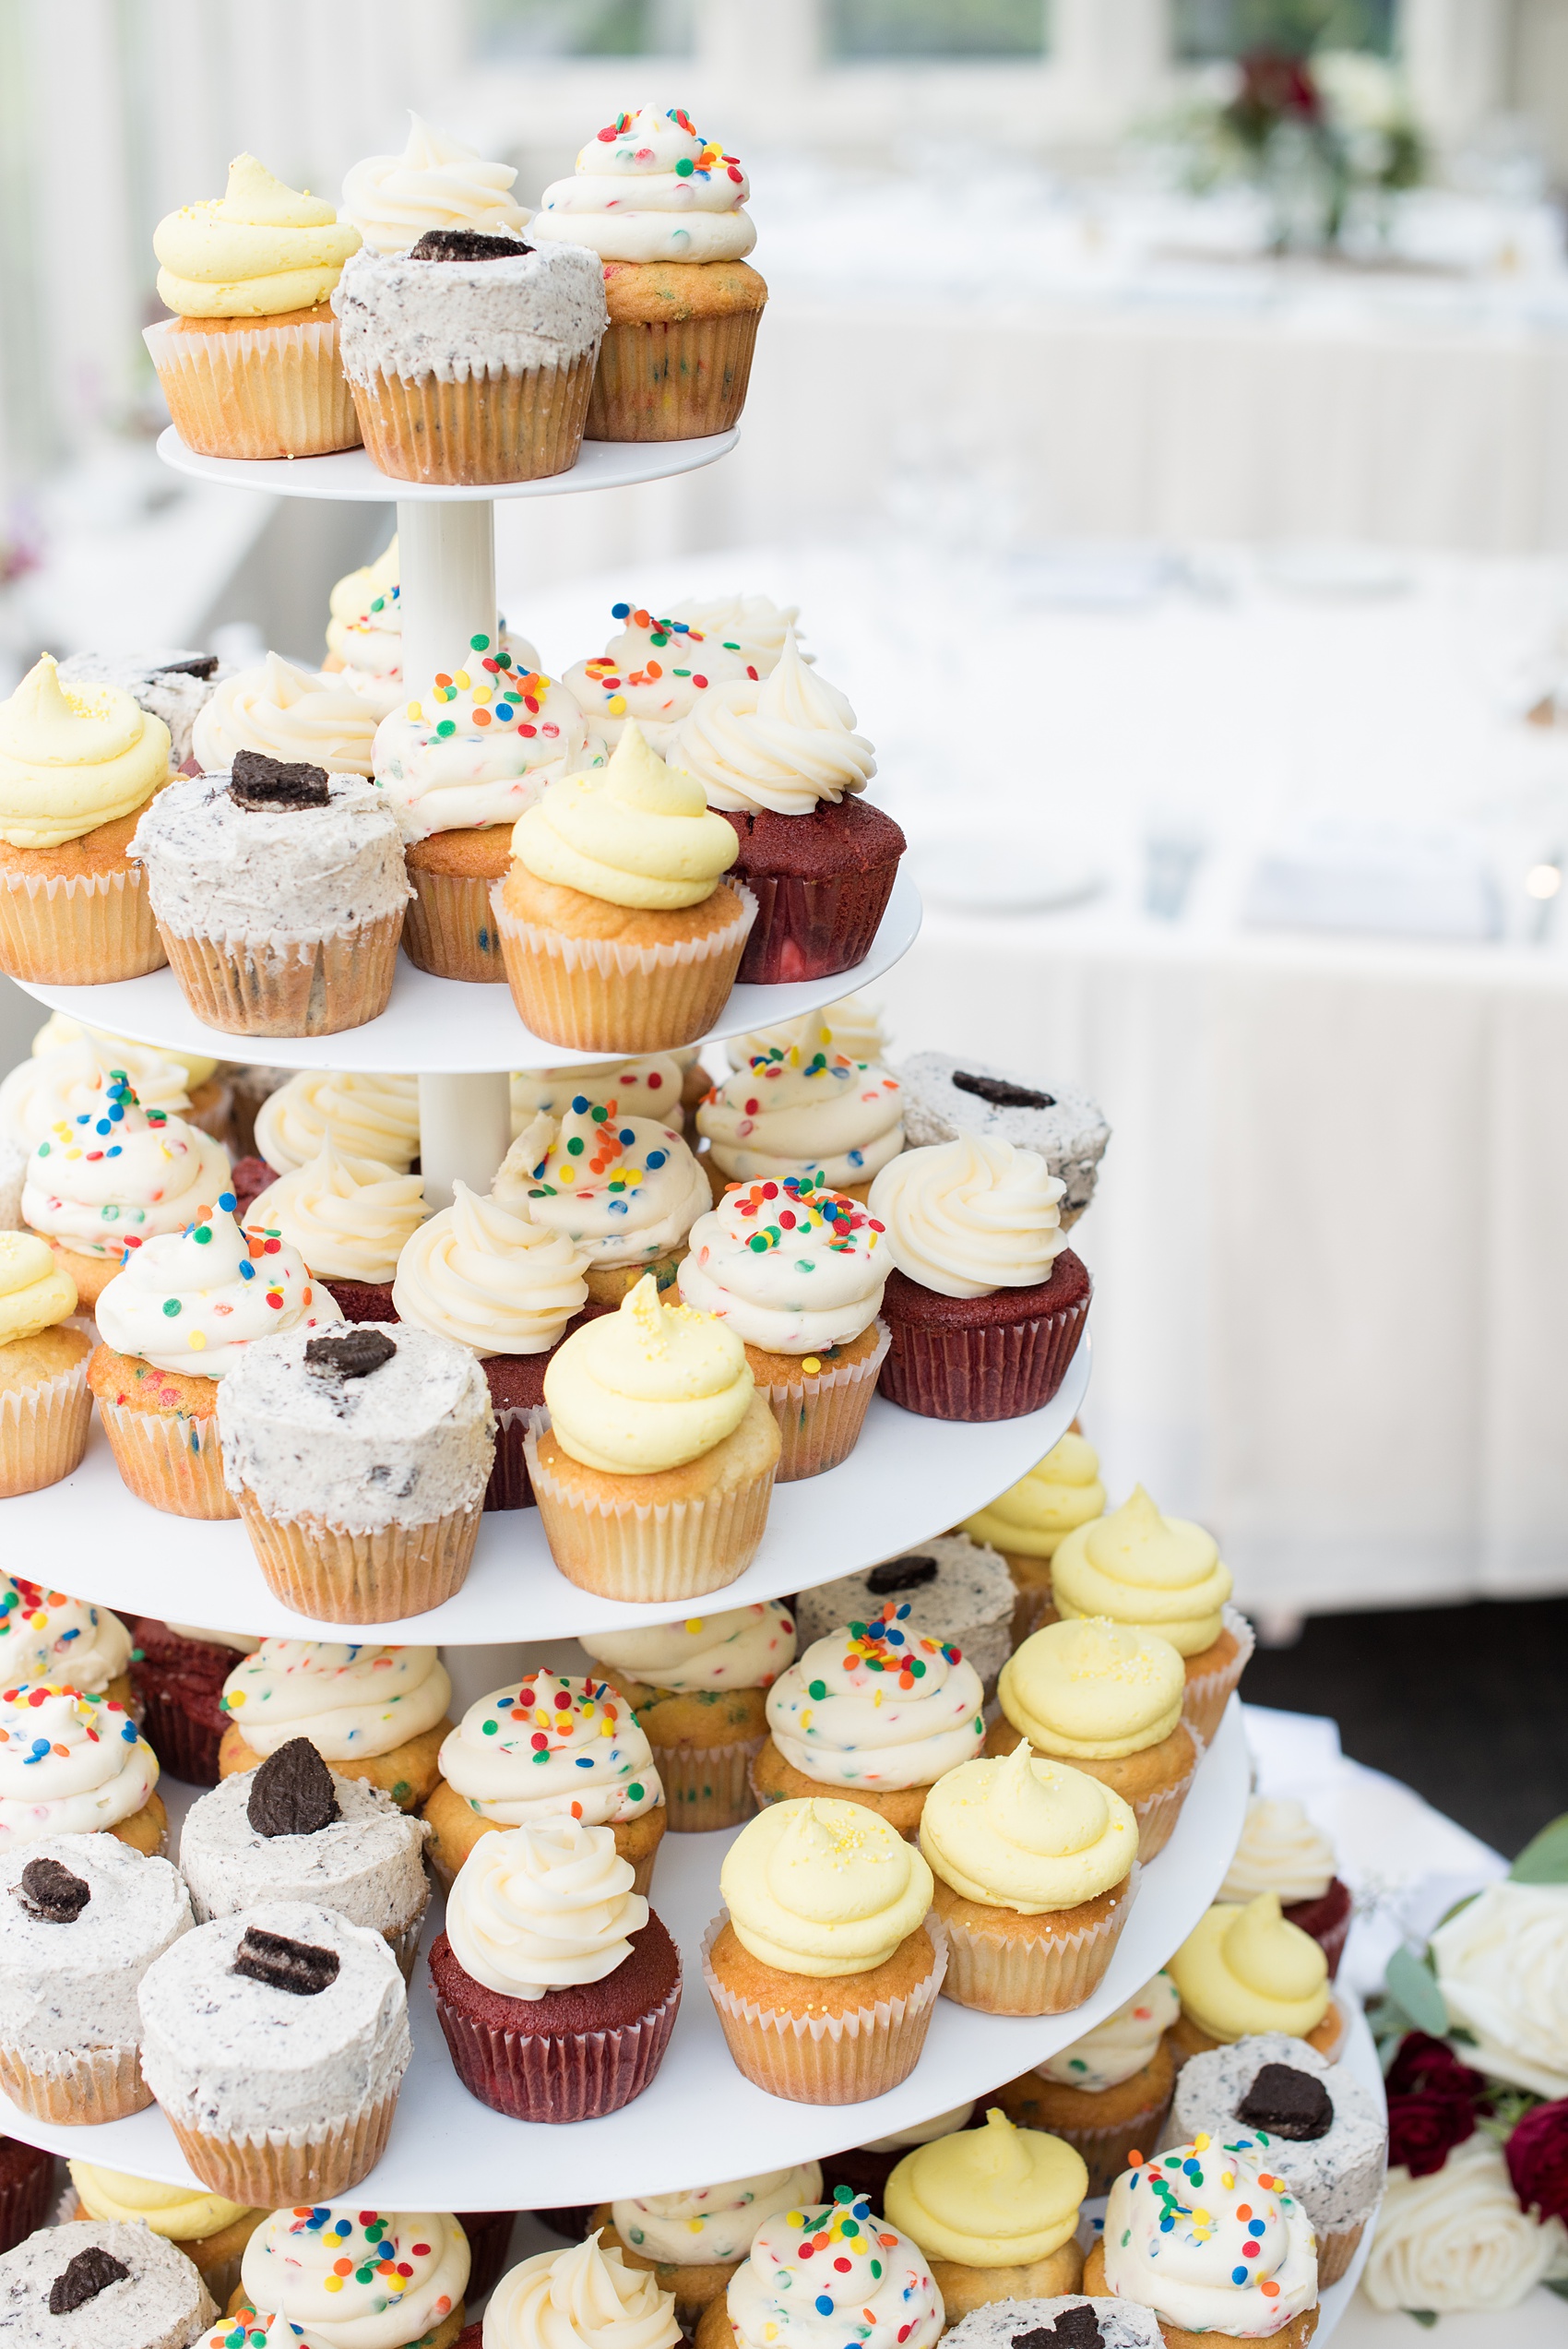 Wedding photos at Crabtree's Kittle House in Chappaqua, New York by Mikkel Paige Photography. The bride and groom decided to have cupcakes instead of wedding cake! Click through for more reception inspiration from this beautiful summer wedding! #mikkelpaige #CrabtreesKittleHouse #WestchesterWeddingVenues #WestchesterWedding #summerwedding #weddingcupcakes #weddingcakesubstitute 